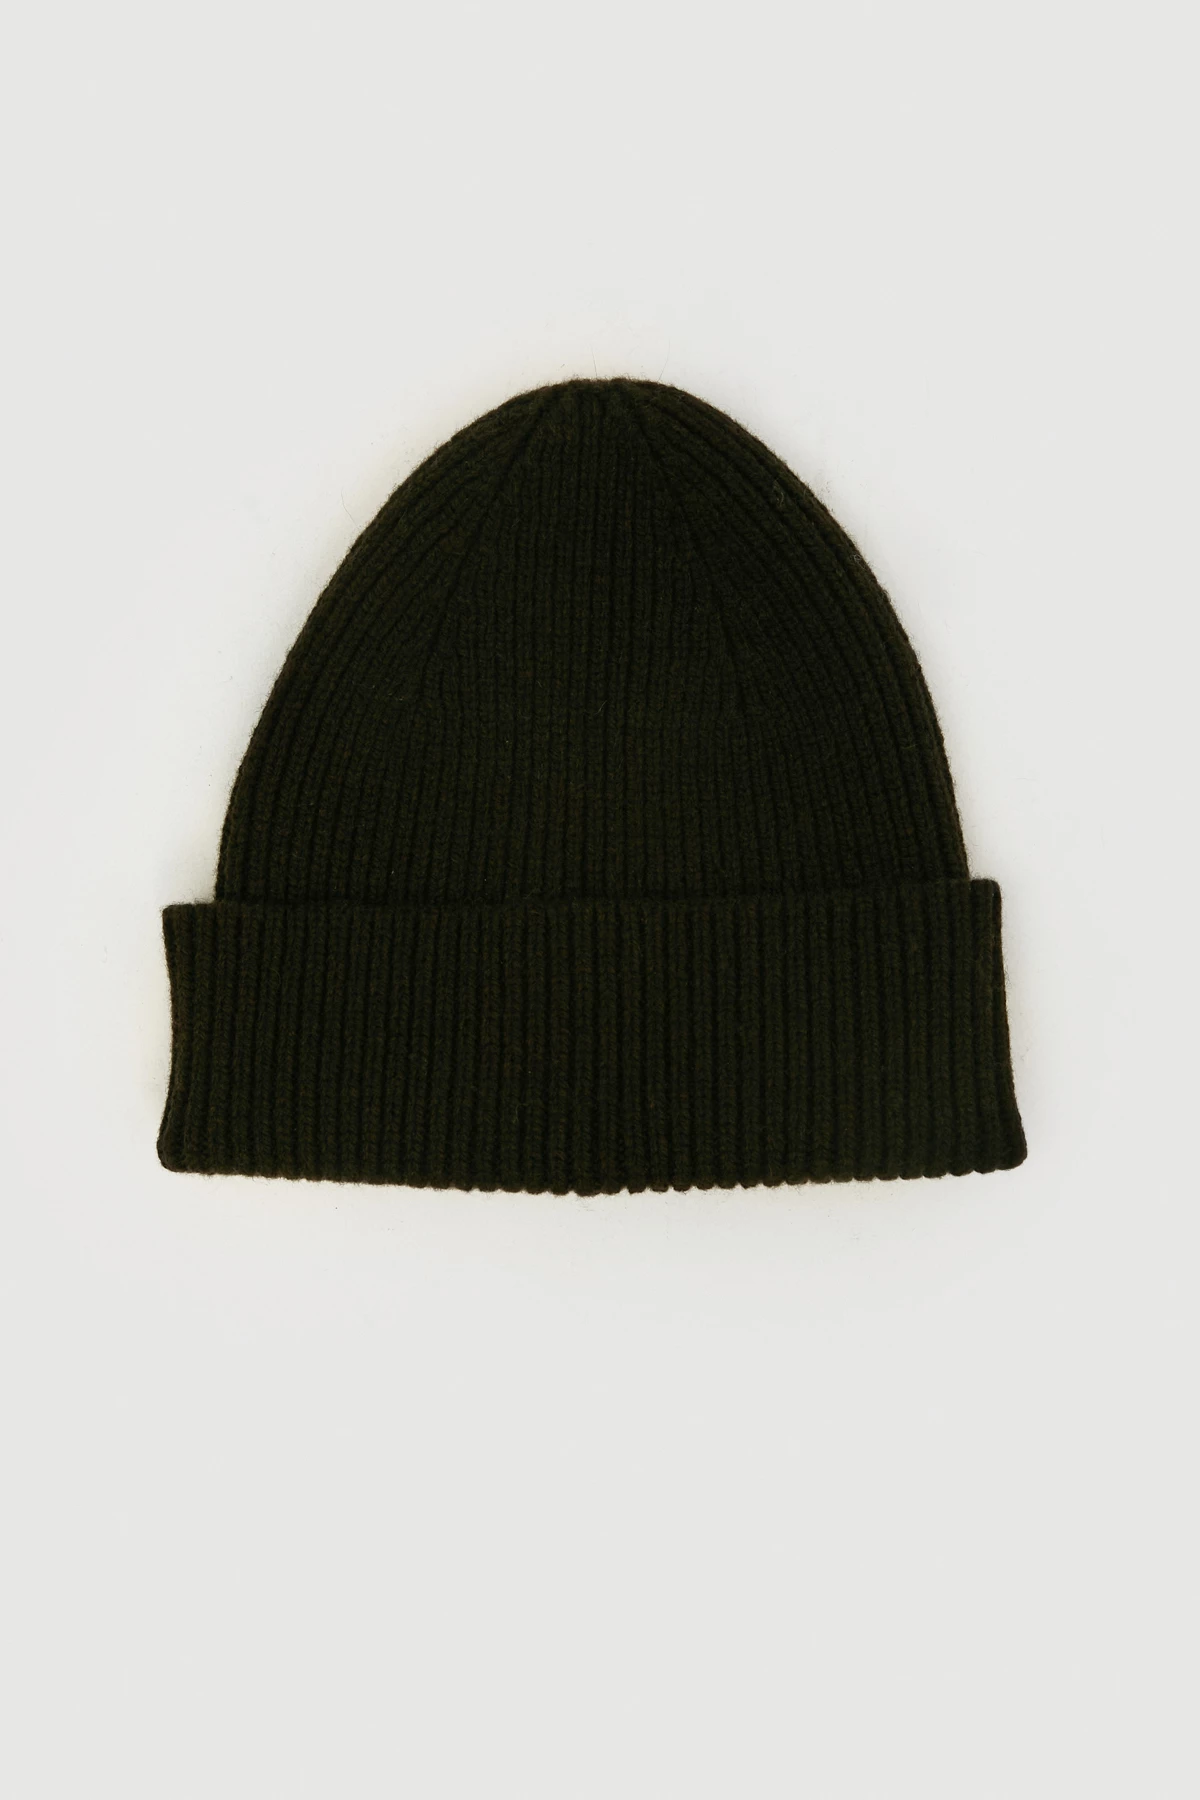 Knitted black cashmere beanie hat with lapel, photo 4